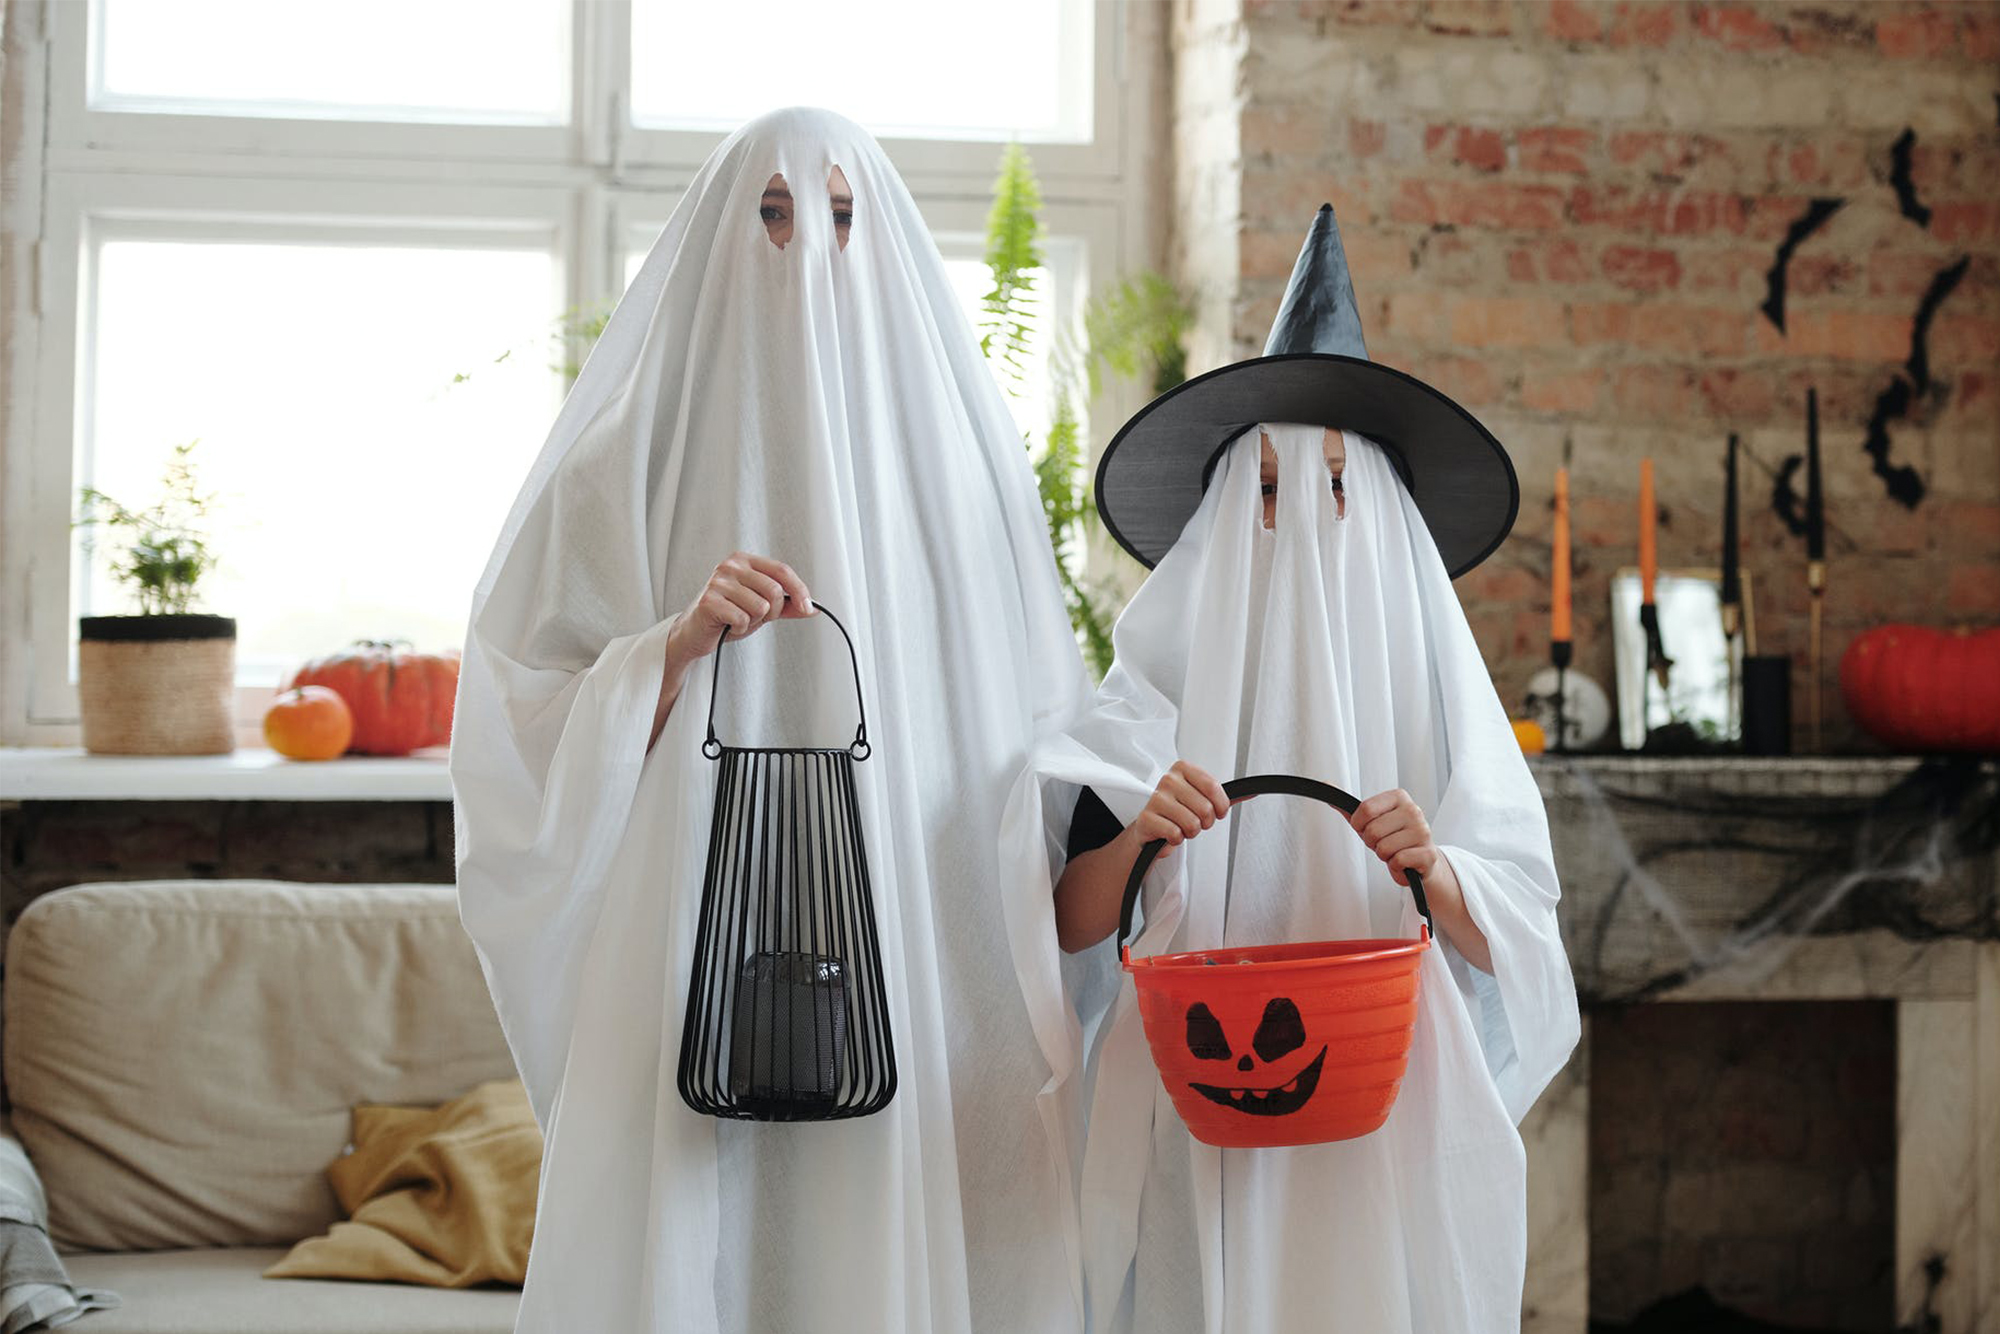 Tips for a COVID-safe Halloween